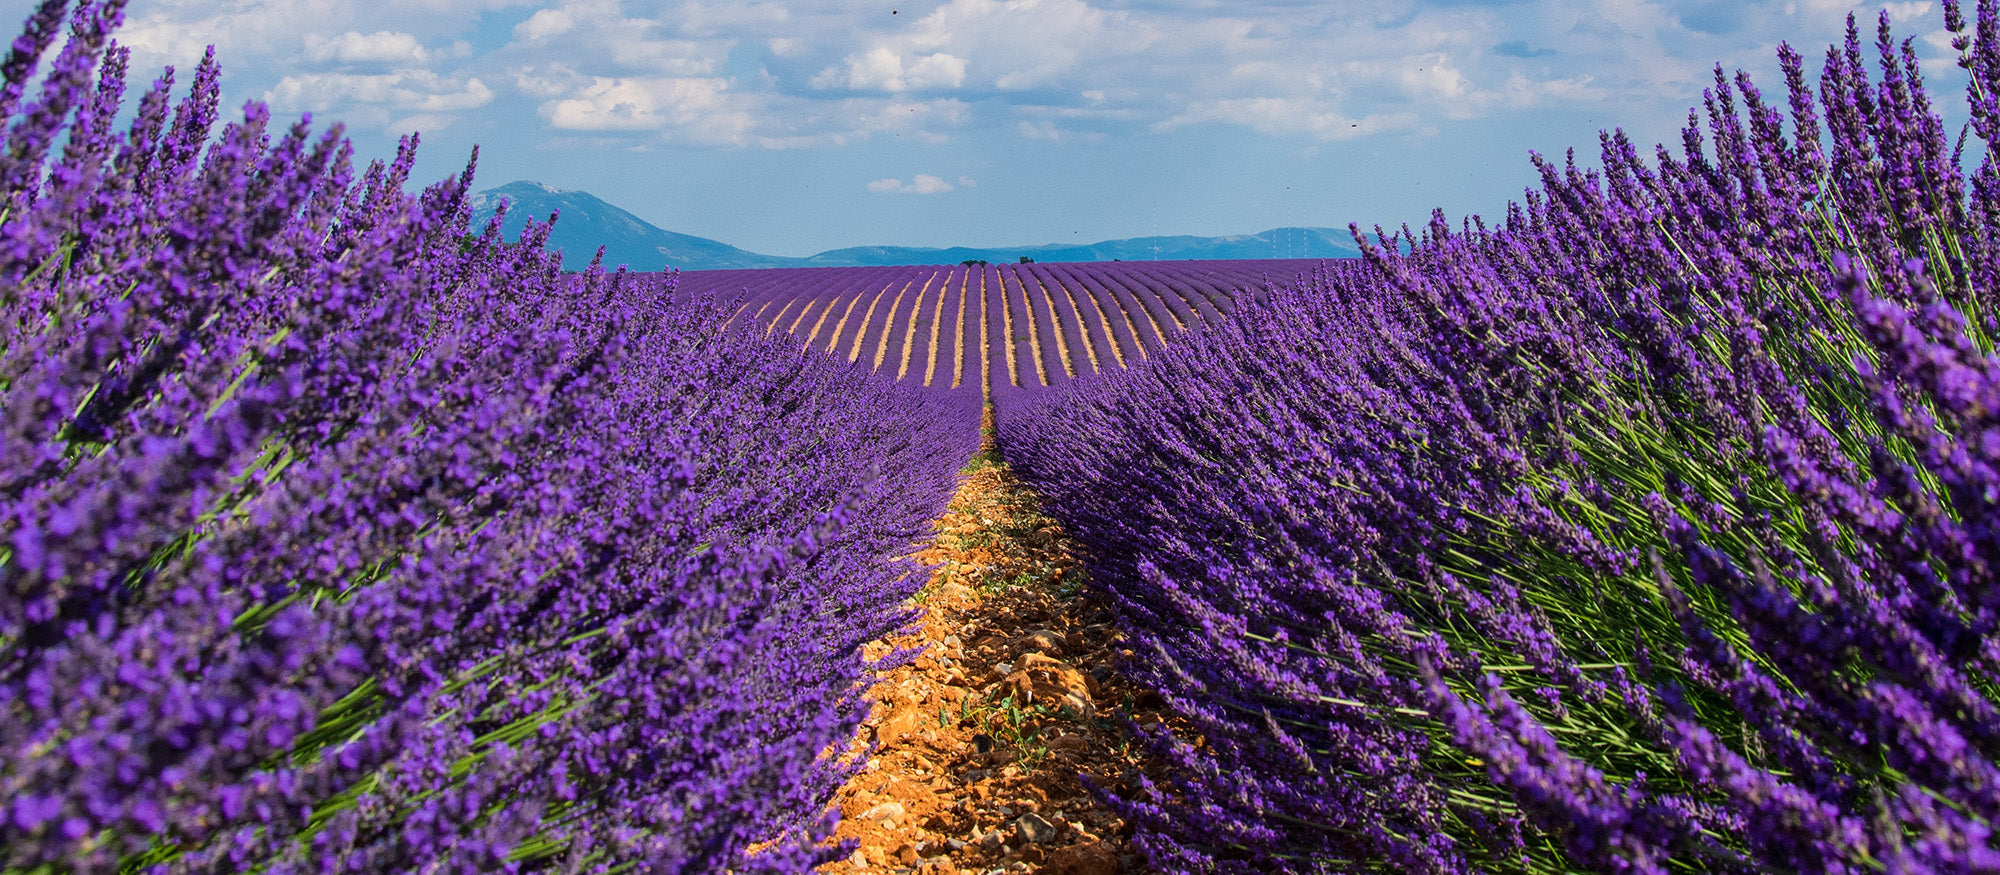 Lavender field of flowers before distilled into essential oil